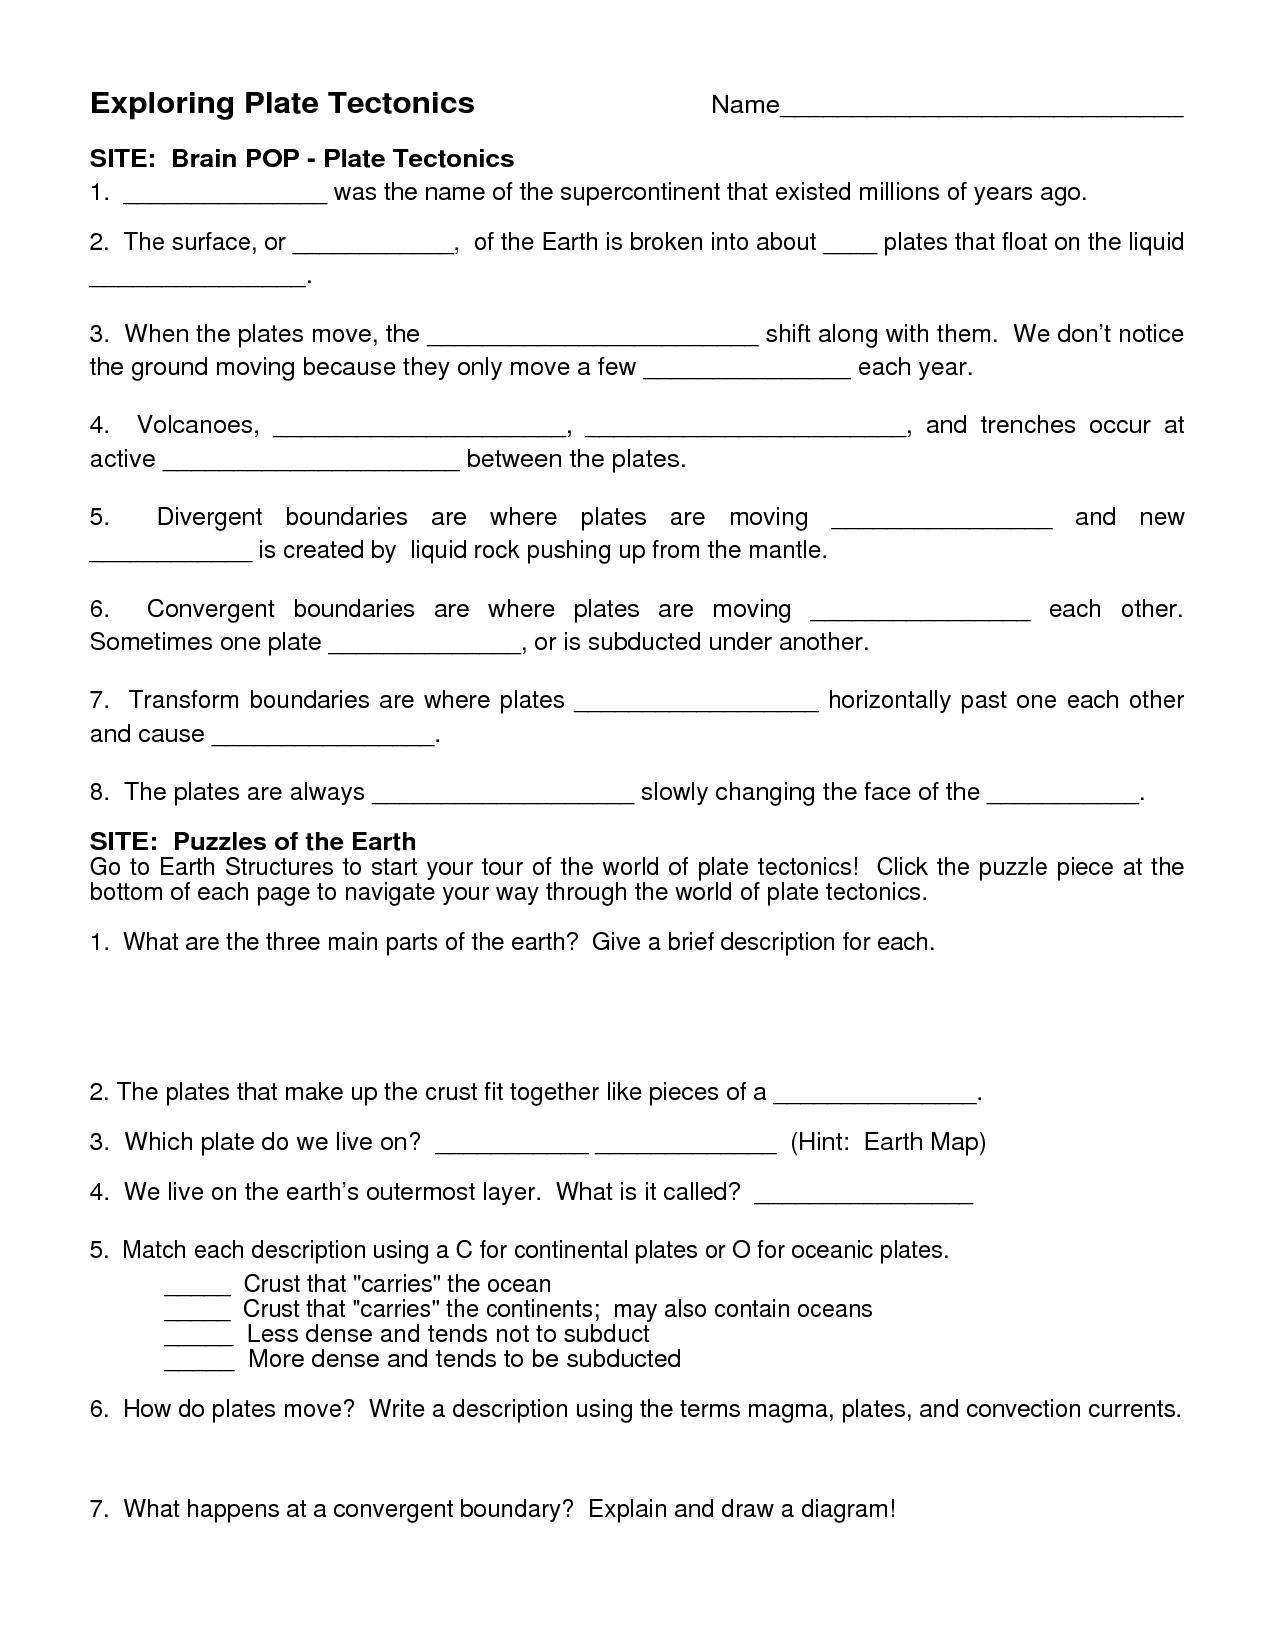 10 Best Images of Inside The Earth Worksheet - Blank Rock Cycle